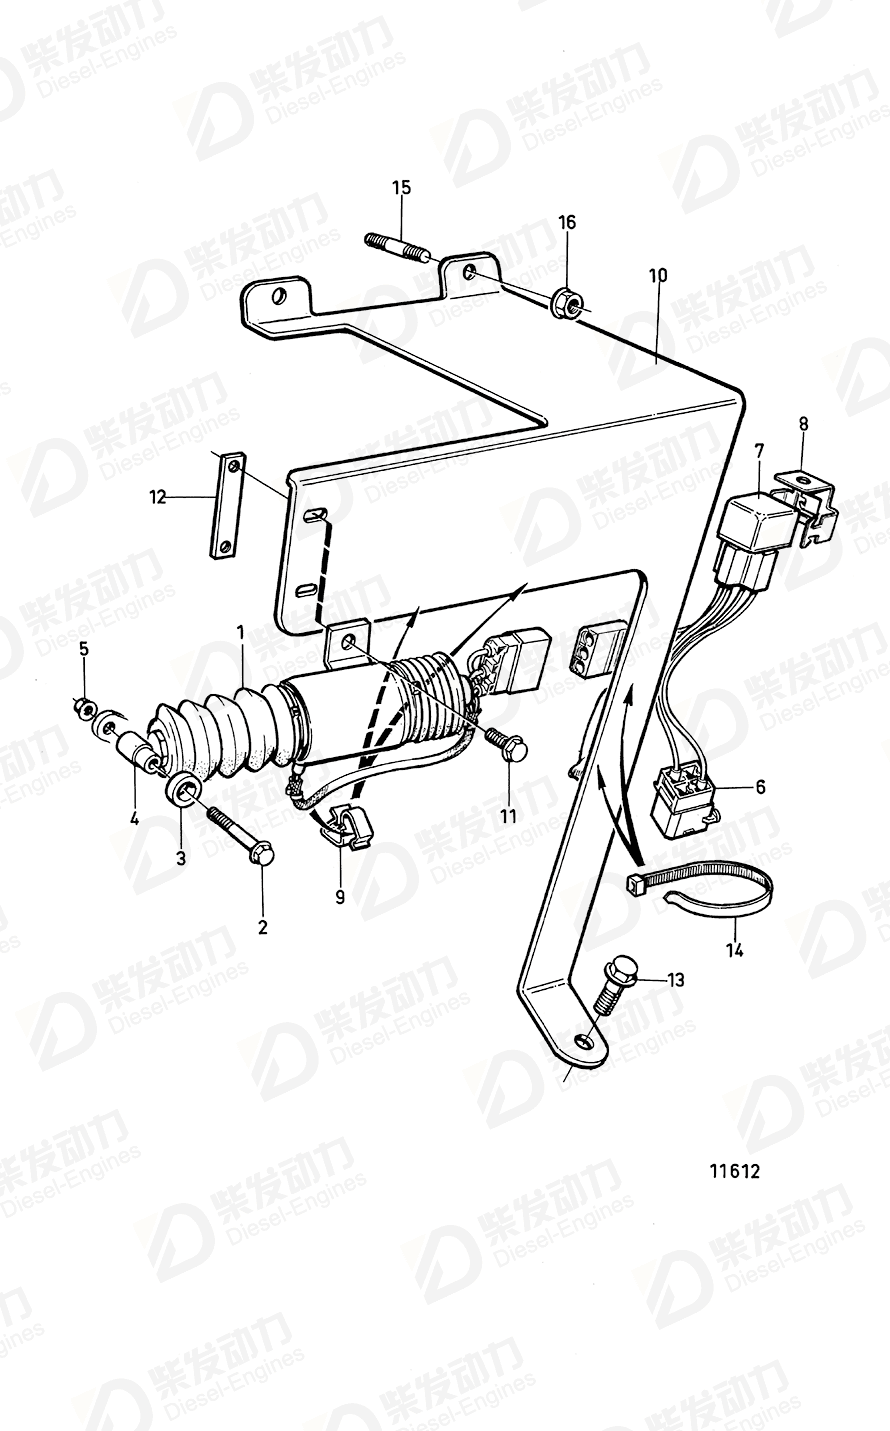 VOLVO Clamp 1212854 Drawing